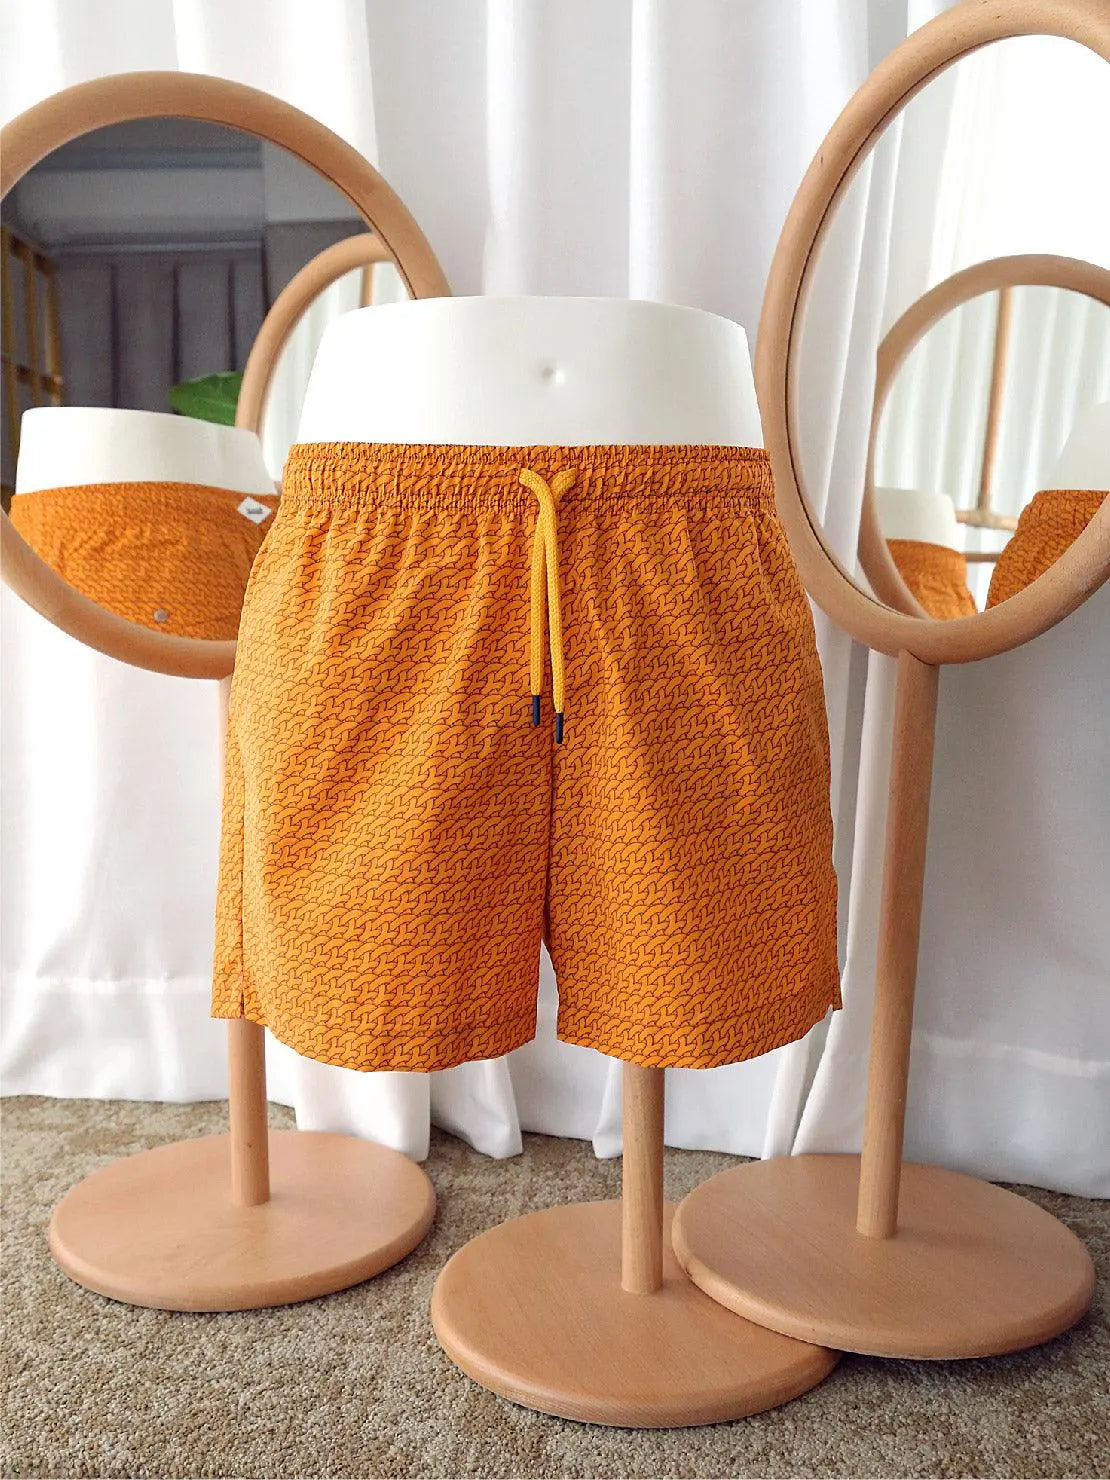 A mannequin at Bassalstore in Barcelona wears Bassal Orange Pattern Swimwear from the brand Bassal. Positioned between two round mirrors on wooden stands, the mannequin showcases reflections of the swimwear from multiple angles. A white curtain hangs in the background.